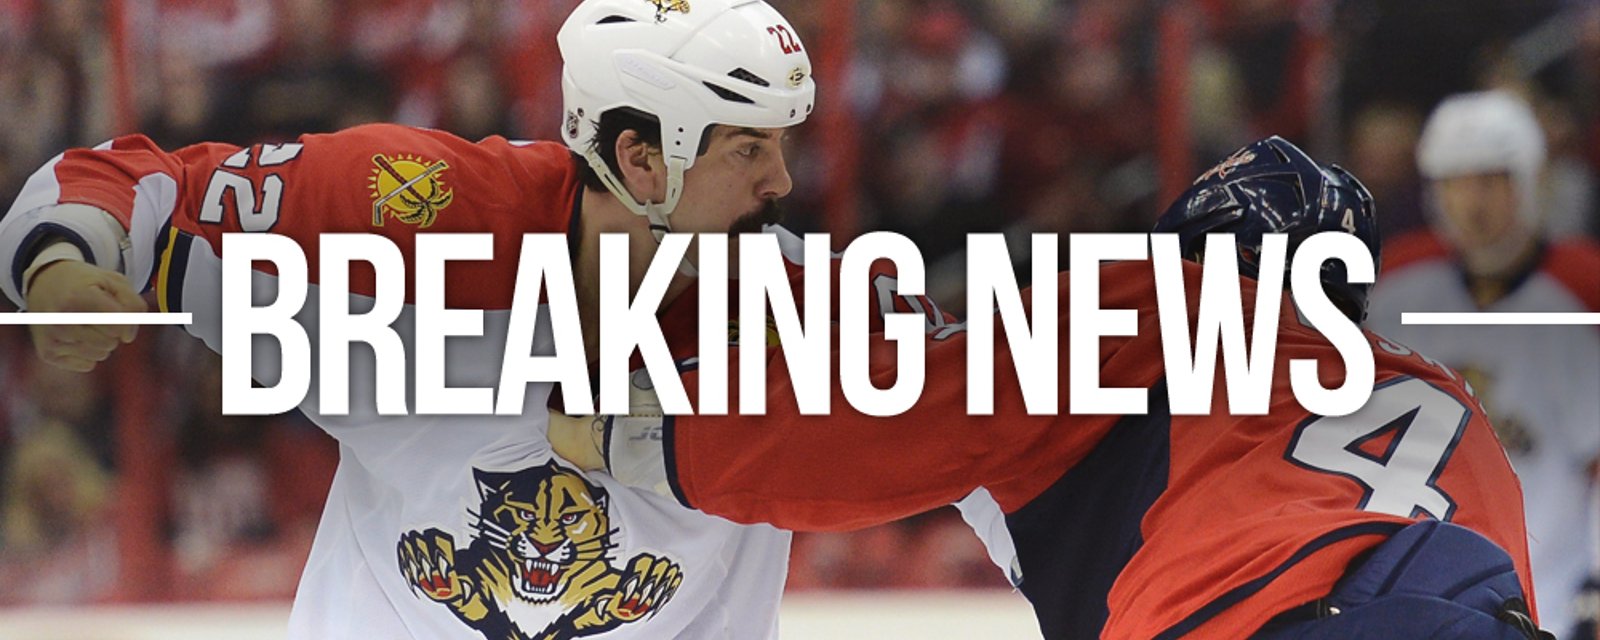 BREAKING: NHL Team reportedly wrote an official letter to ban fights.